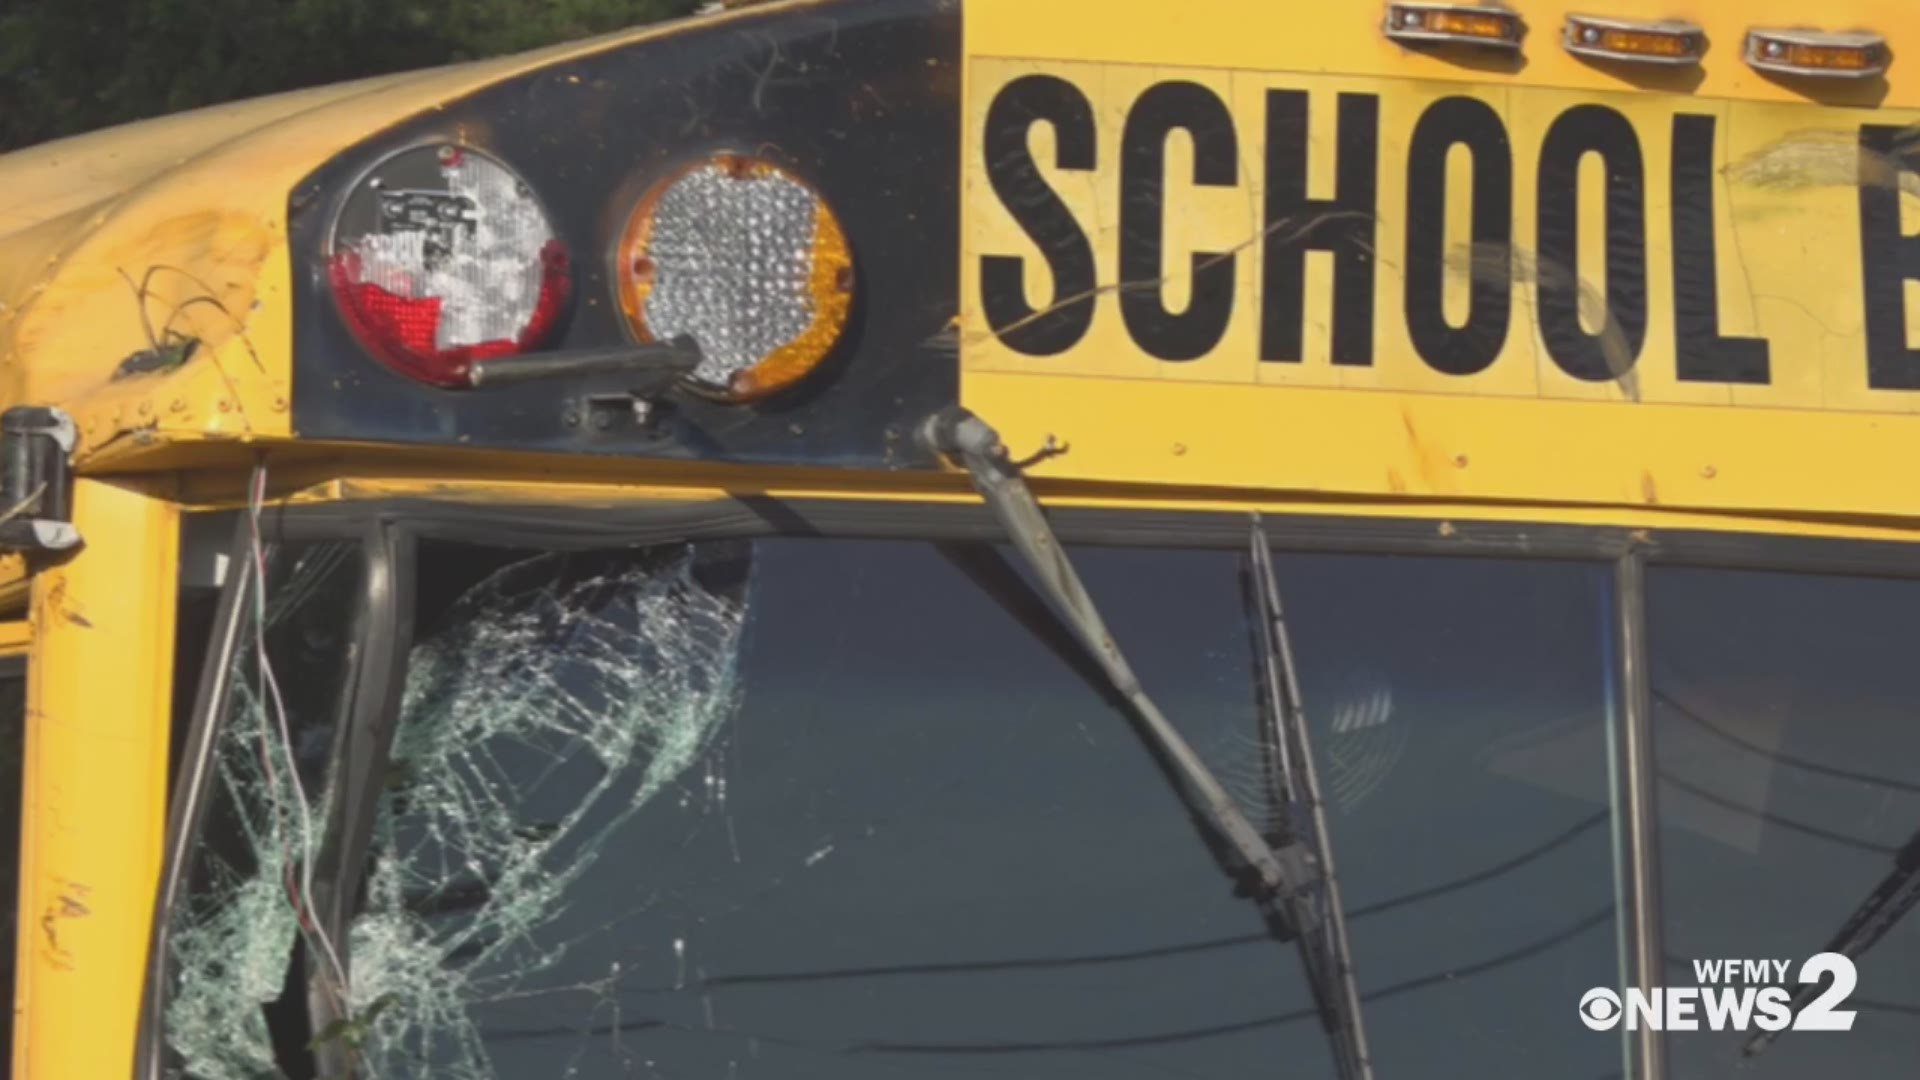 Police say the bus driver ran off the roadway around 6:53 a.m. Tuesday in the 2100 block of Penny Rd in High Point. A Guilford County Schools spokesperson confirms one student was transported to the hospital.